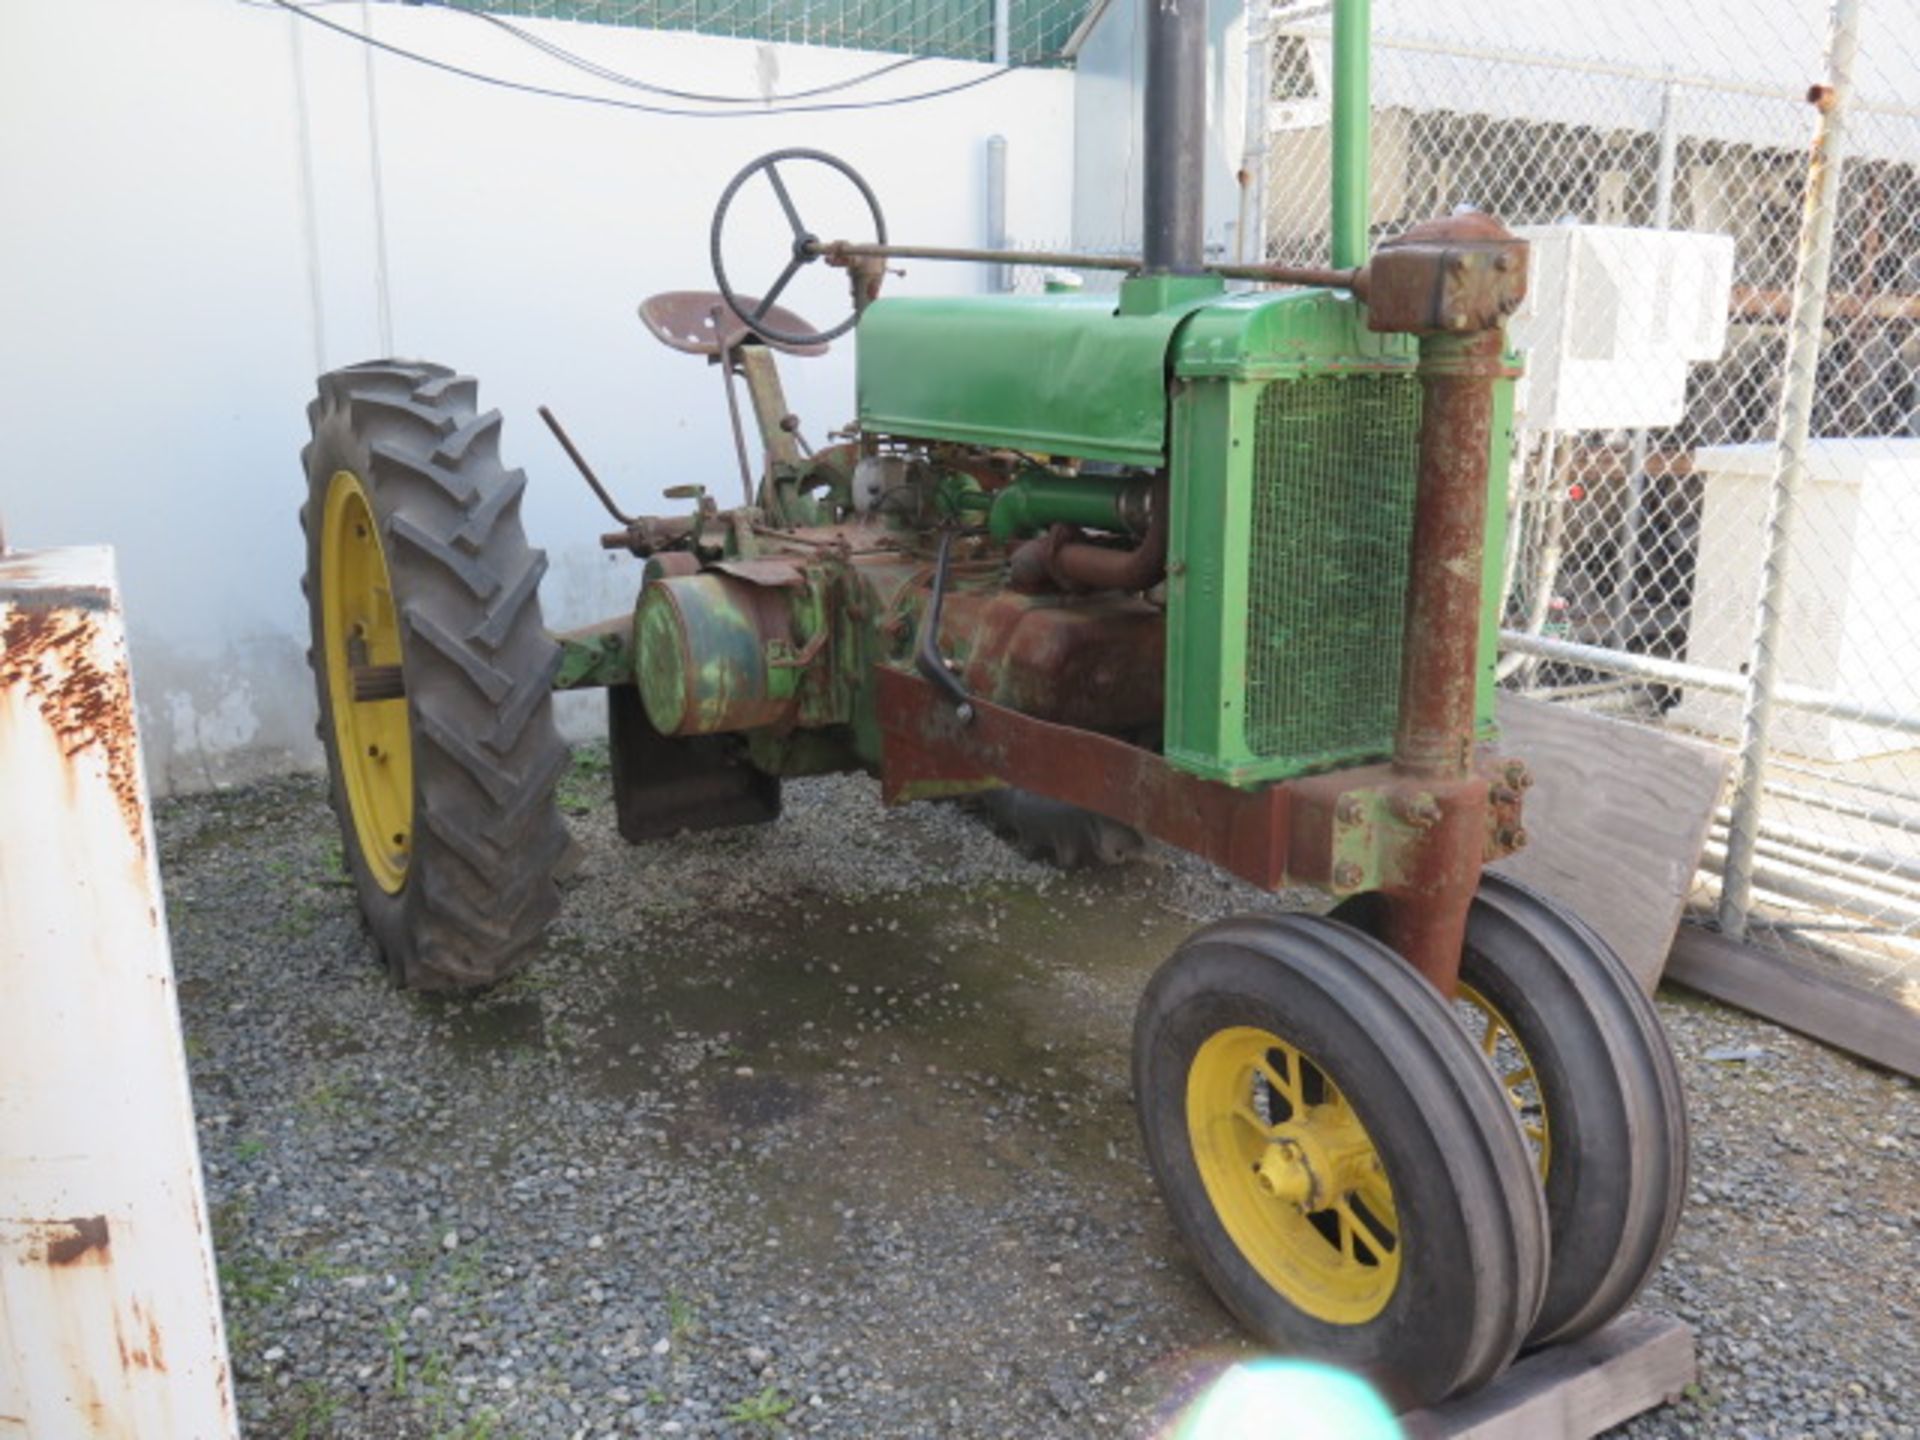 1937 John Deere mdl. G Tractor s/n 1115 Restoration Project with Many New Parts SOLD AS IS - Image 3 of 13